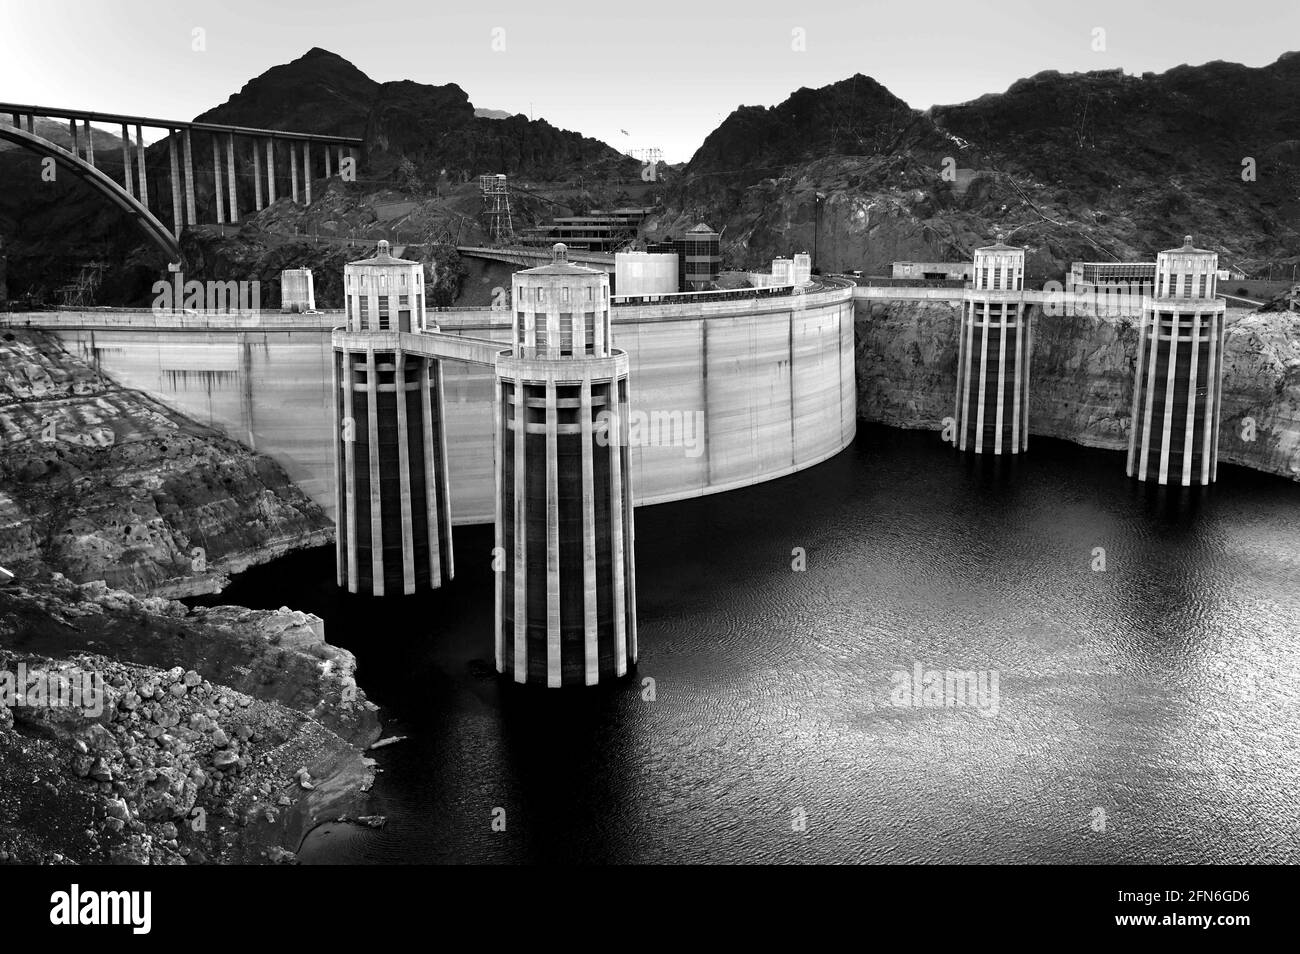 Lake Mead Nra U.S. 13th May, 2021. (EDITORS NOTE: Image has been converted to black and white.) The Hoover Dam is seen in the Black Canyon of the Colorado River on the border between Arizona and Nevada. Hoover Dam, completed in 1936, impounds Lake Mead, the largest reservoir in the United States by volume. Hoover Dam is a major tourist attraction; nearly a million people tour the dam each year. The dam's generators provide power for public and private utilities in Nevada, Arizona, and California. Credit: David Becker/ZUMA Wire/Alamy Live News Stock Photo